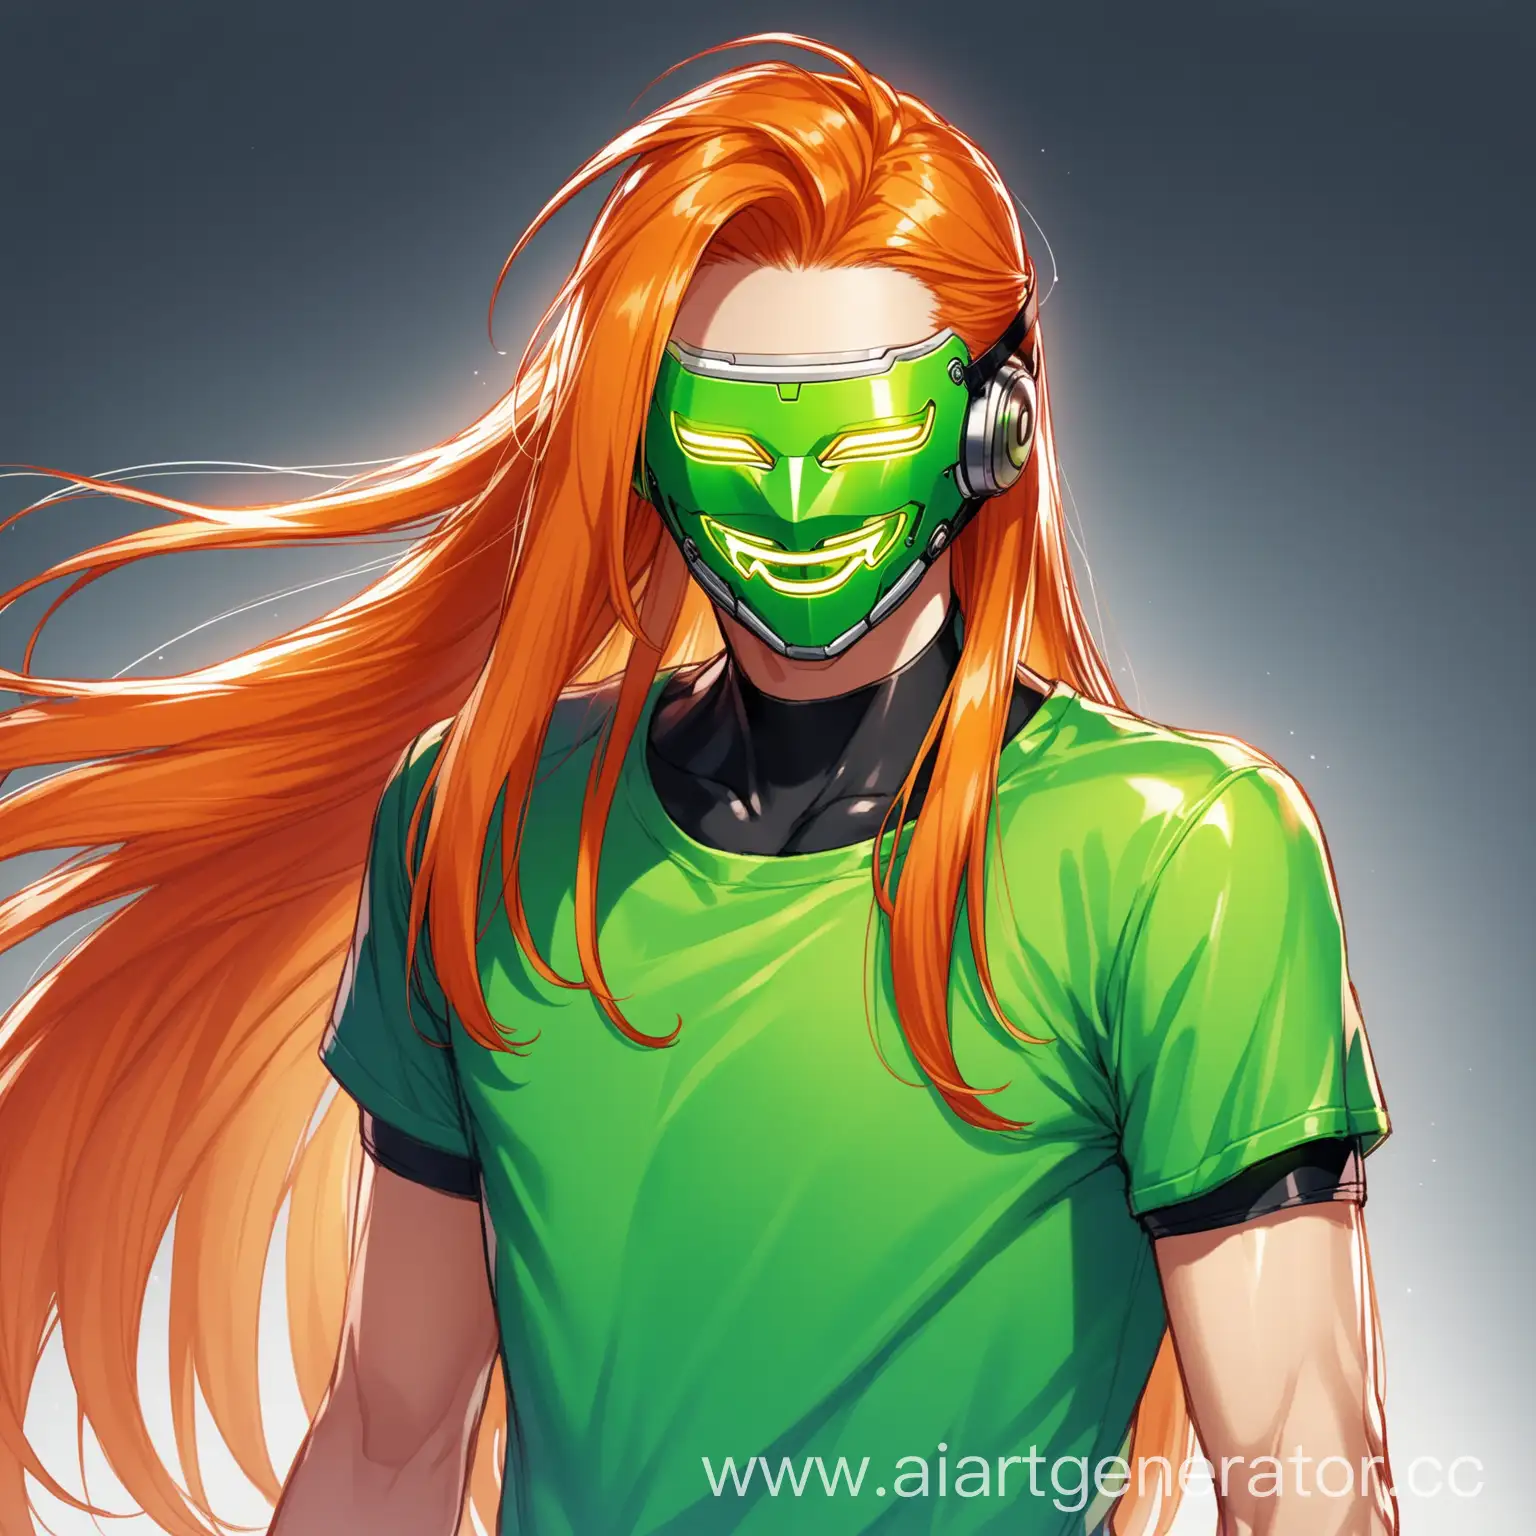 Teenage-Male-Android-Wearing-CyberMask-with-Ginger-Hair-Expressing-Joy